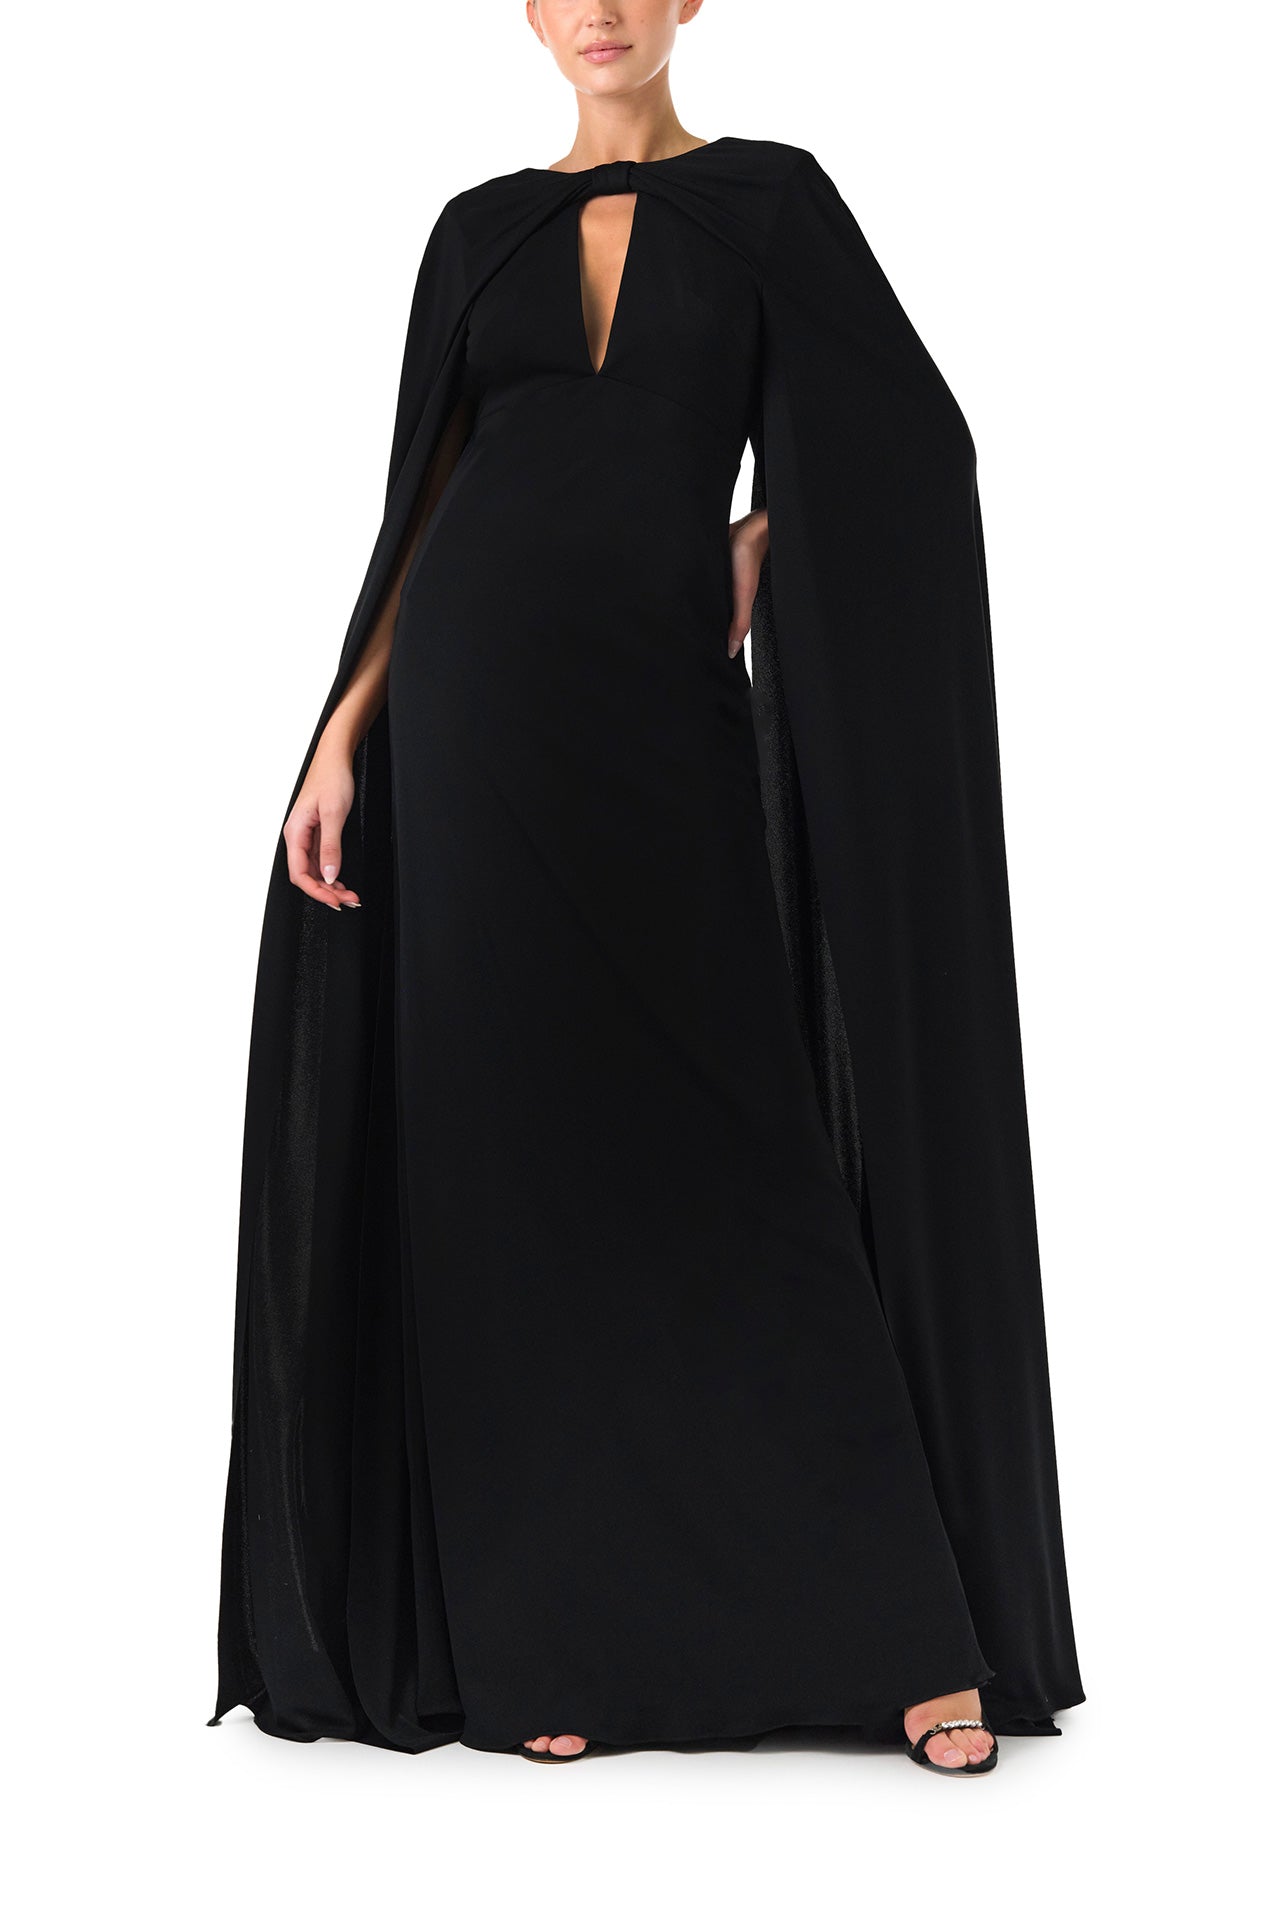 Cape Dresses at a Discounted Price - The Dress Outlet